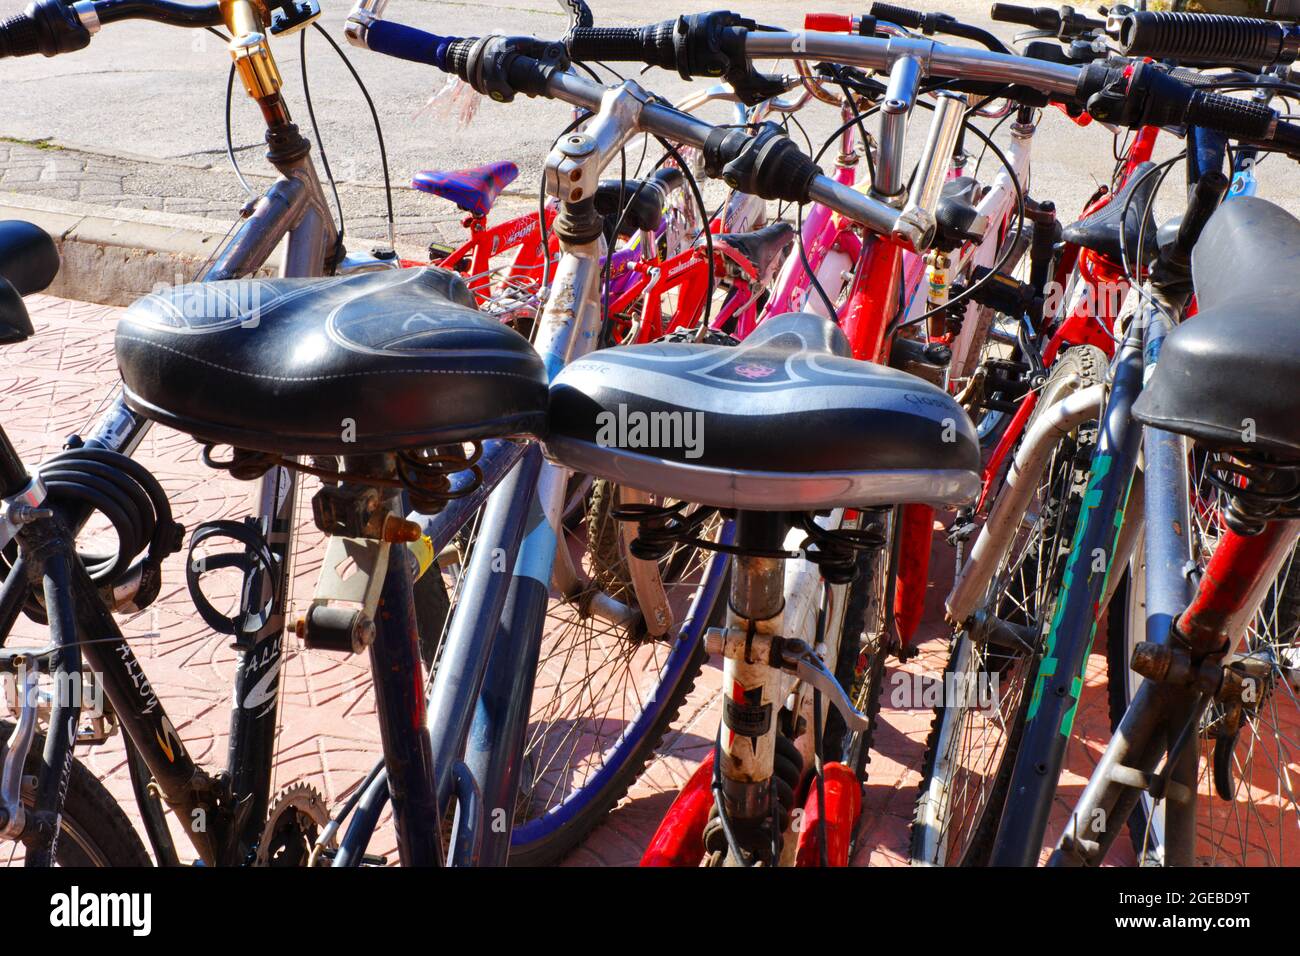 Many Bikes High Resolution Stock Photography and Images - Alamy